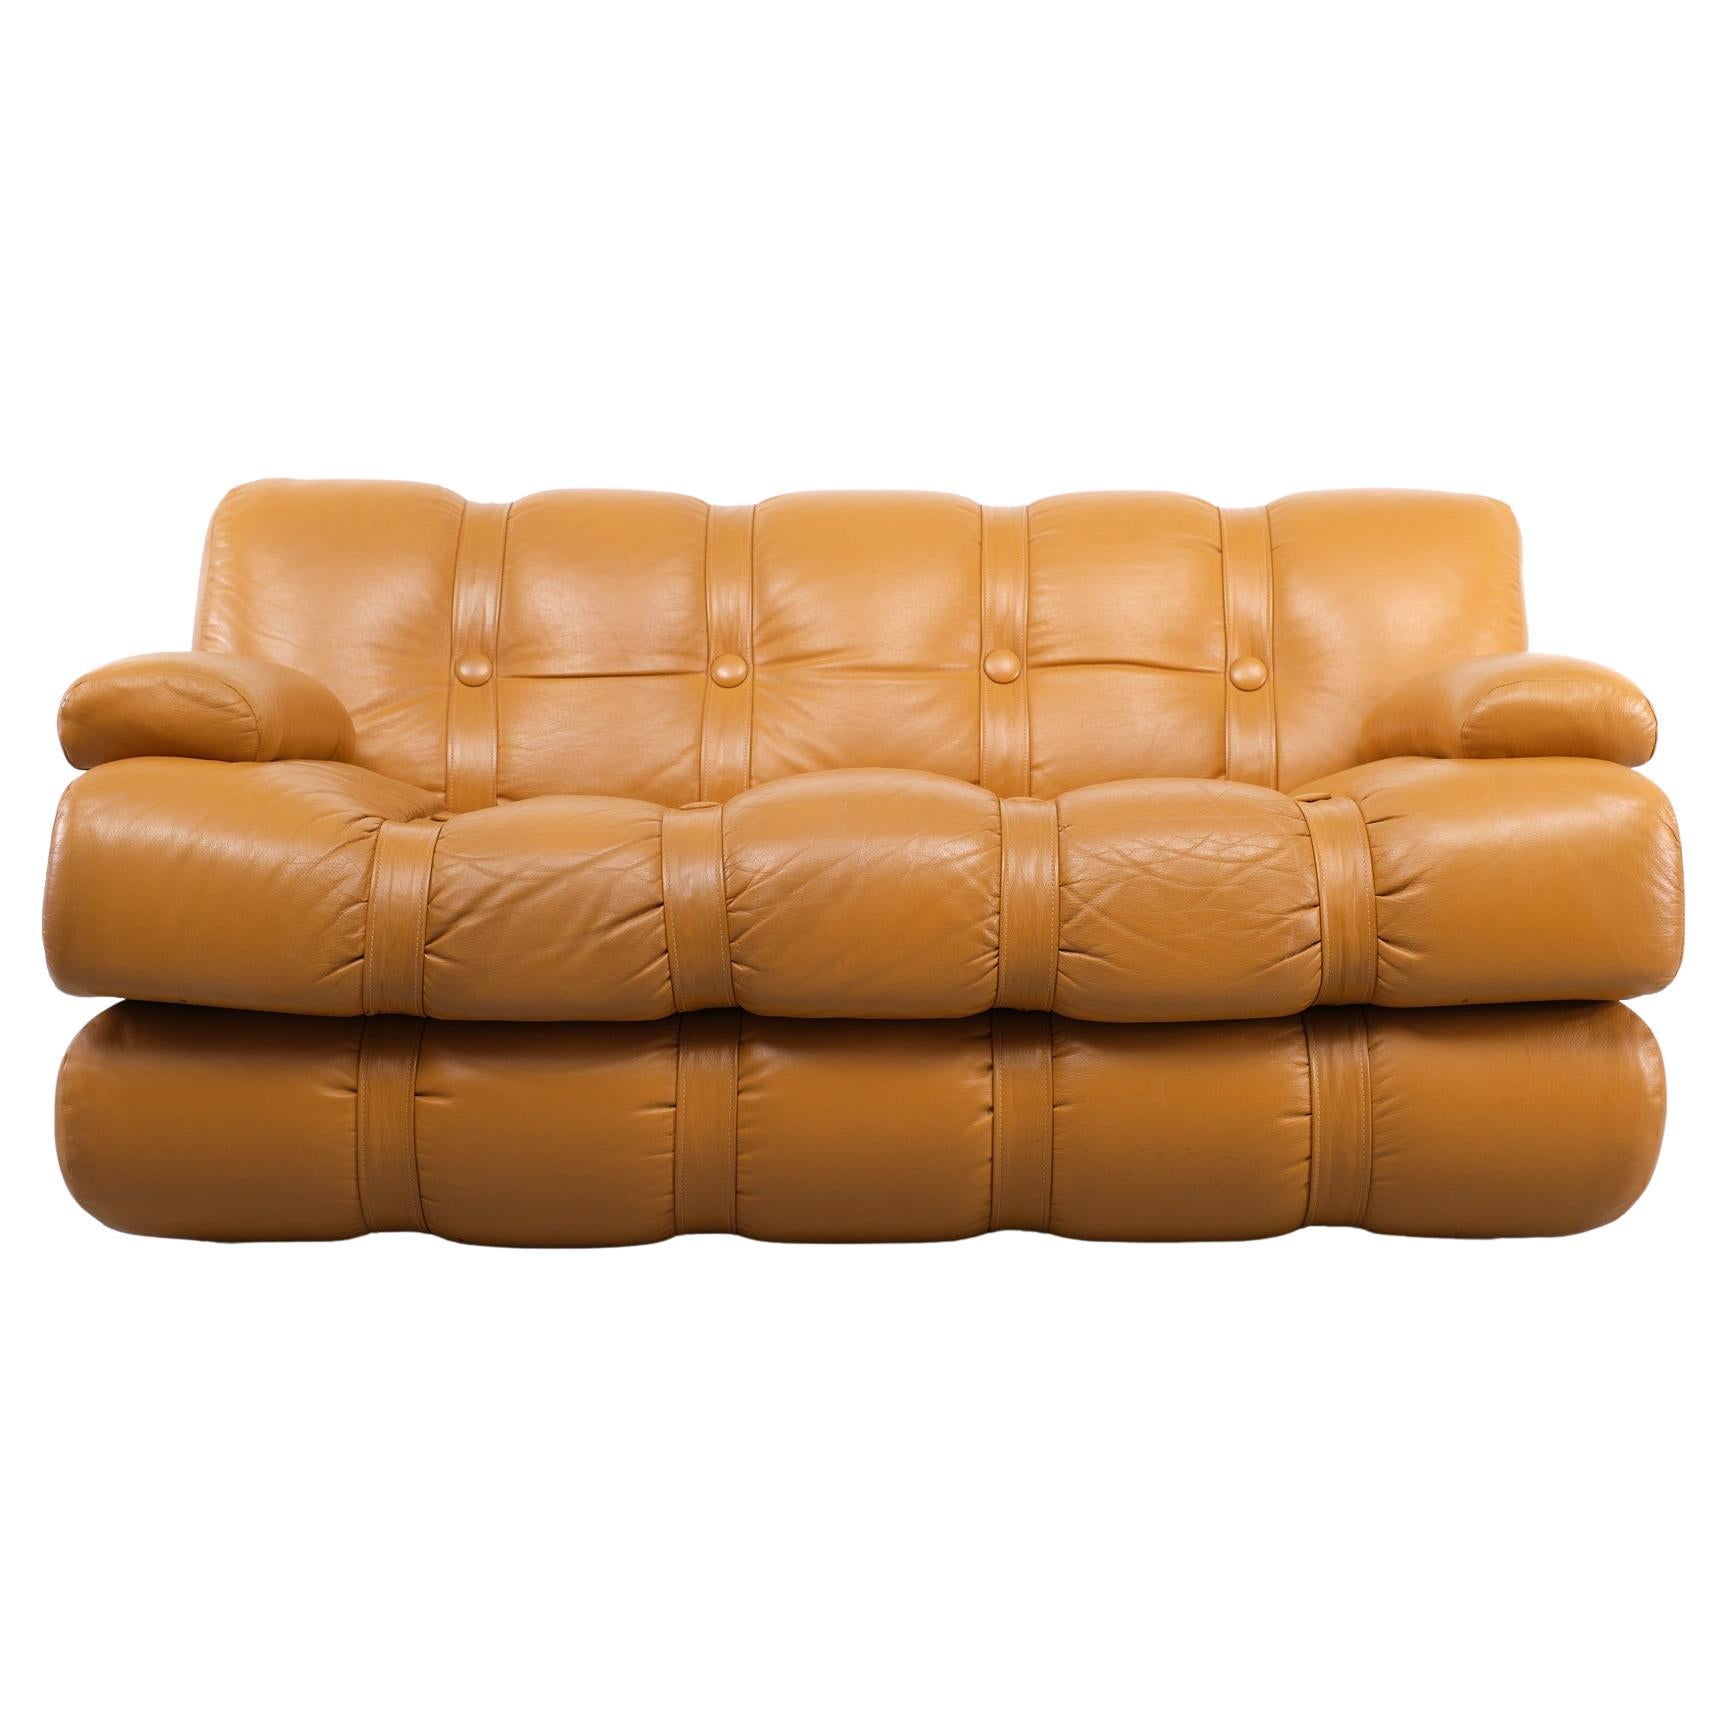 Superb Two seater sofa  Leather  1970s Italy  For Sale